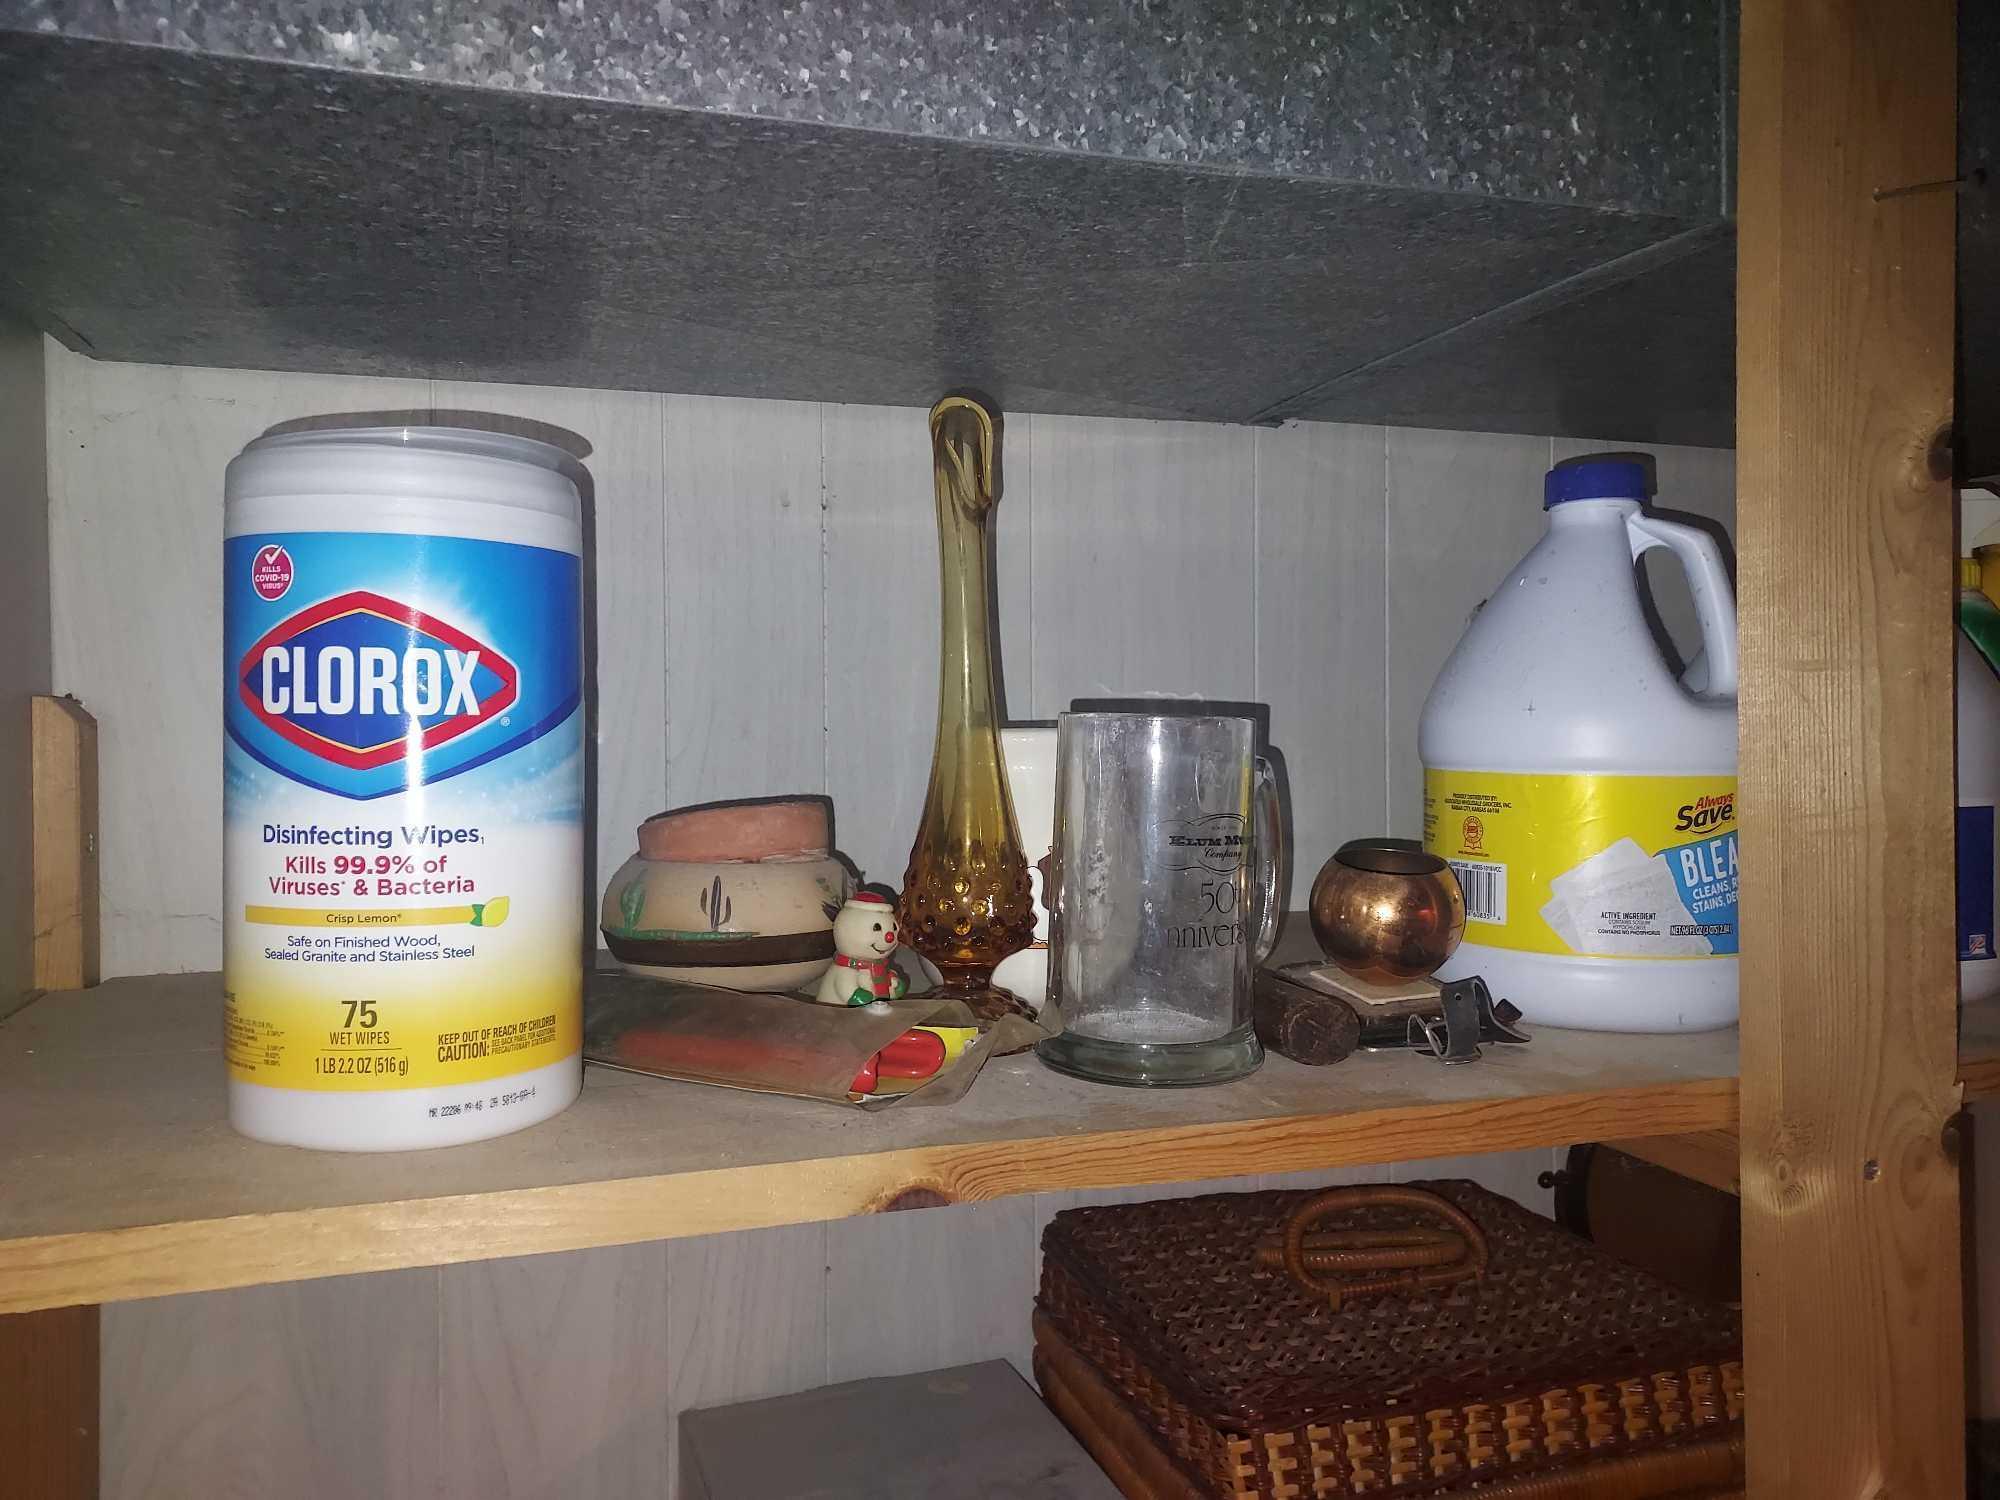 Contents of Basement Shelving - Jars, Decor, Appliances, Ironing Board, Extension Cords, Lights, &